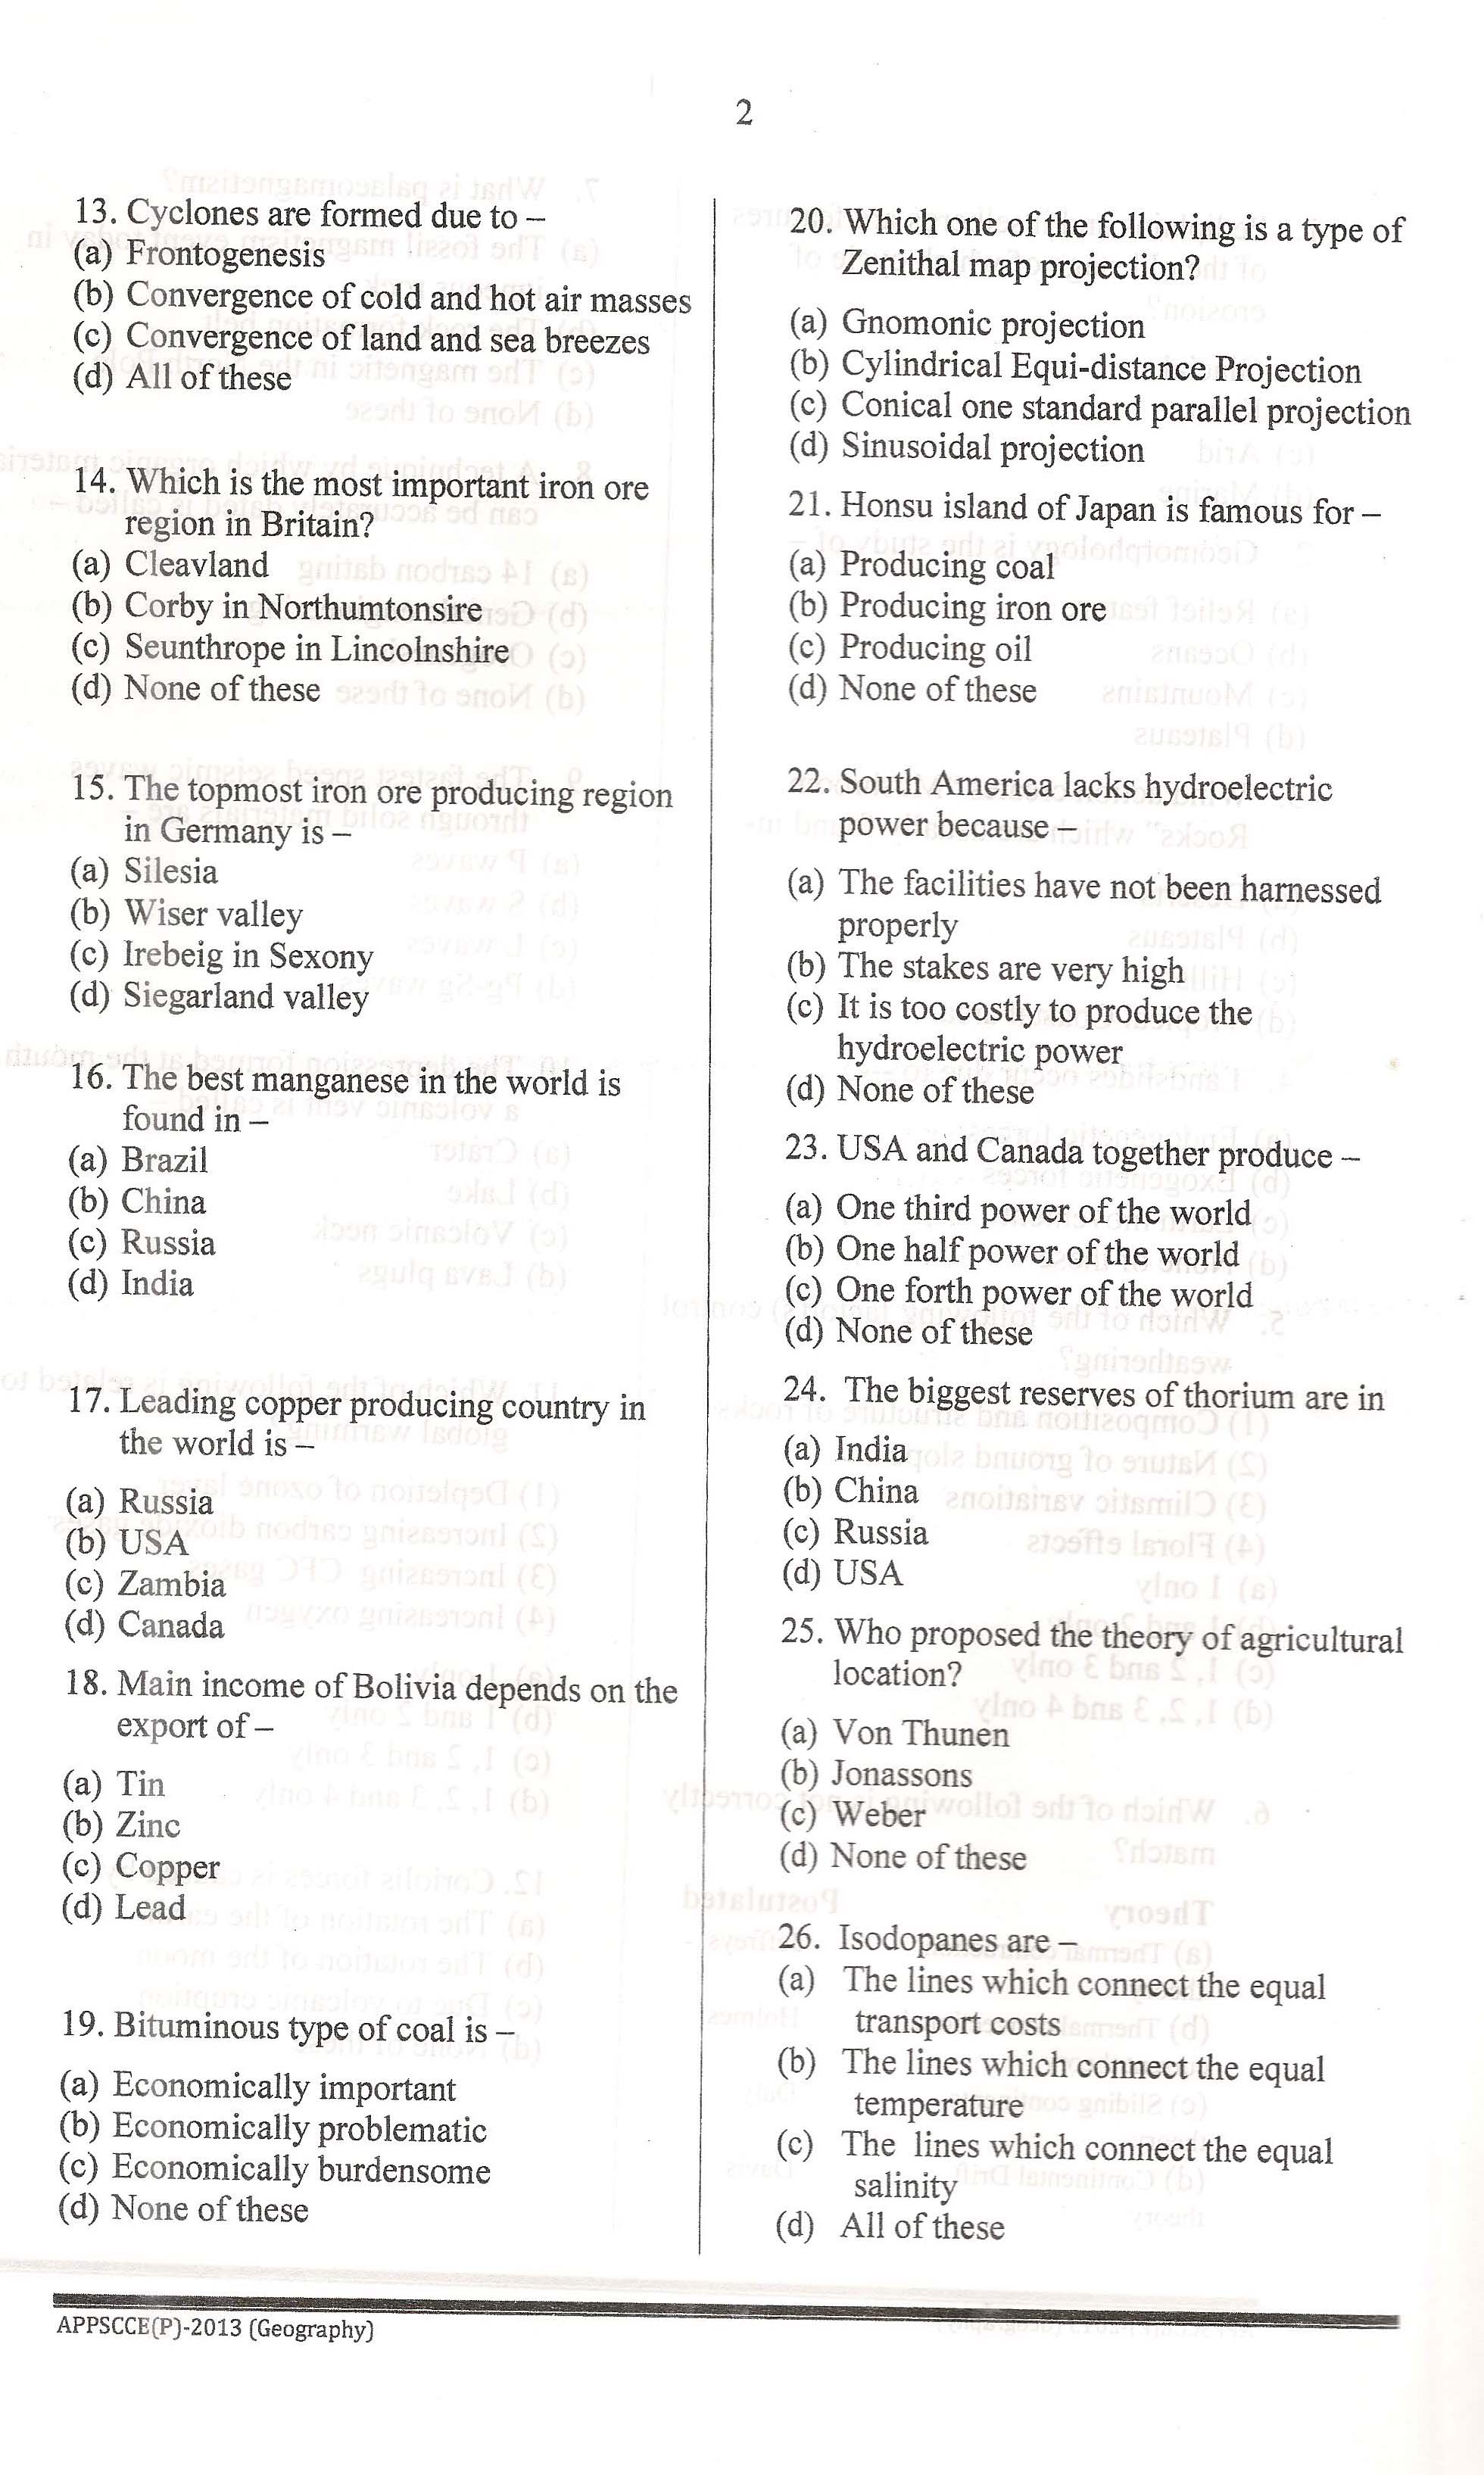 APPSC Combined Competitive Prelims Exam 2013 Geography 3